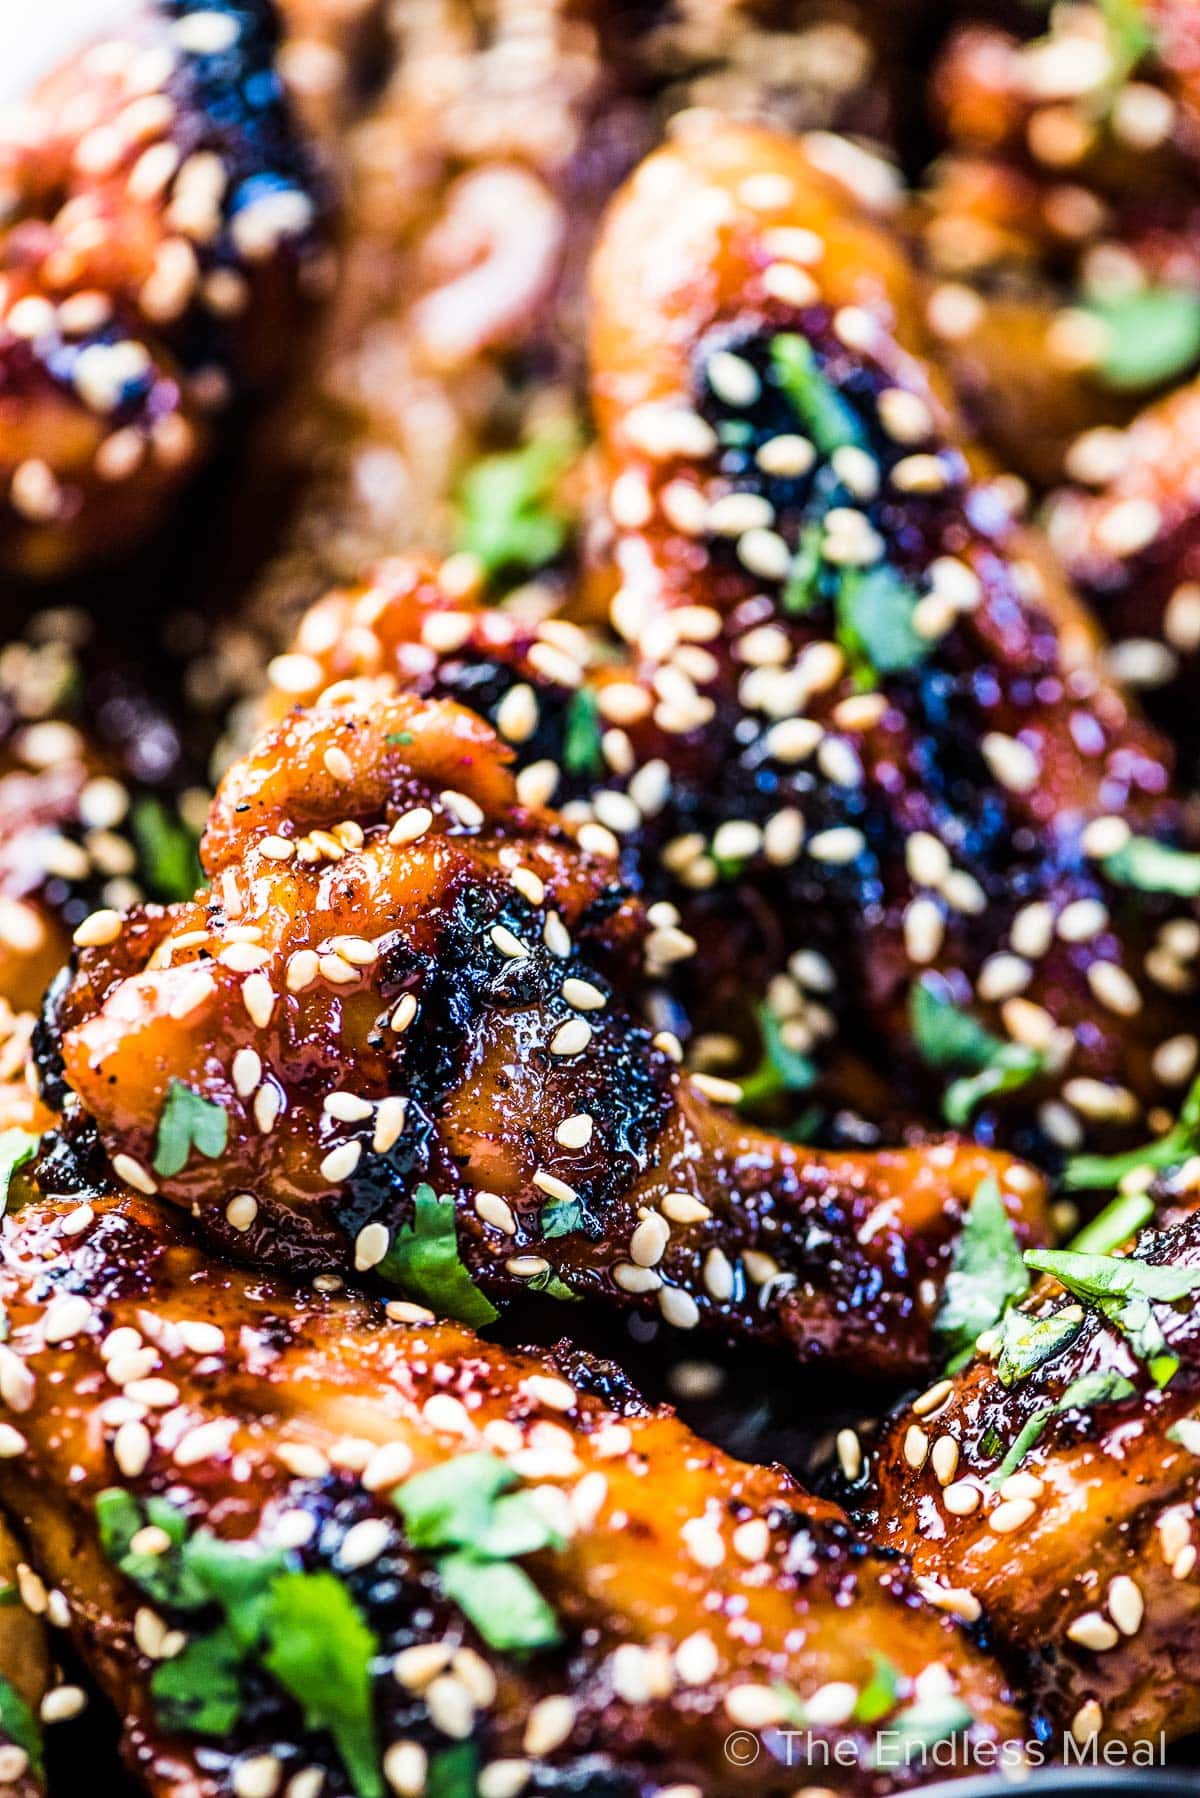 A closeup of the grilled wings.